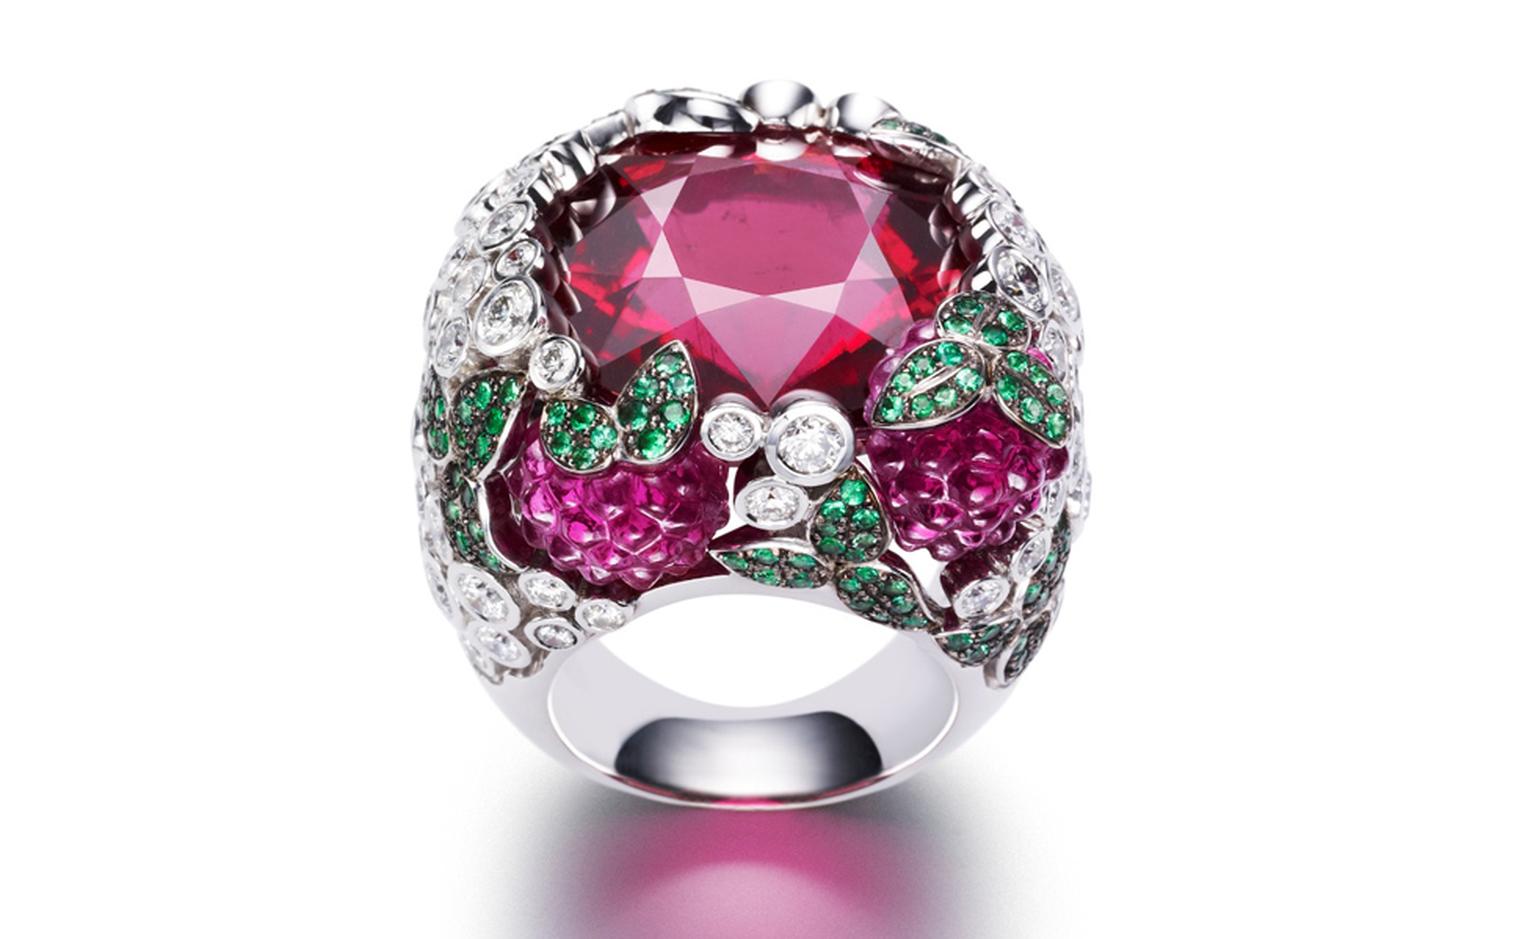 PIAGET, Limelight cocktail inspiration, Raspberry Daiquiri ring in white gold and diamonds, emeralds and rubellite. POA